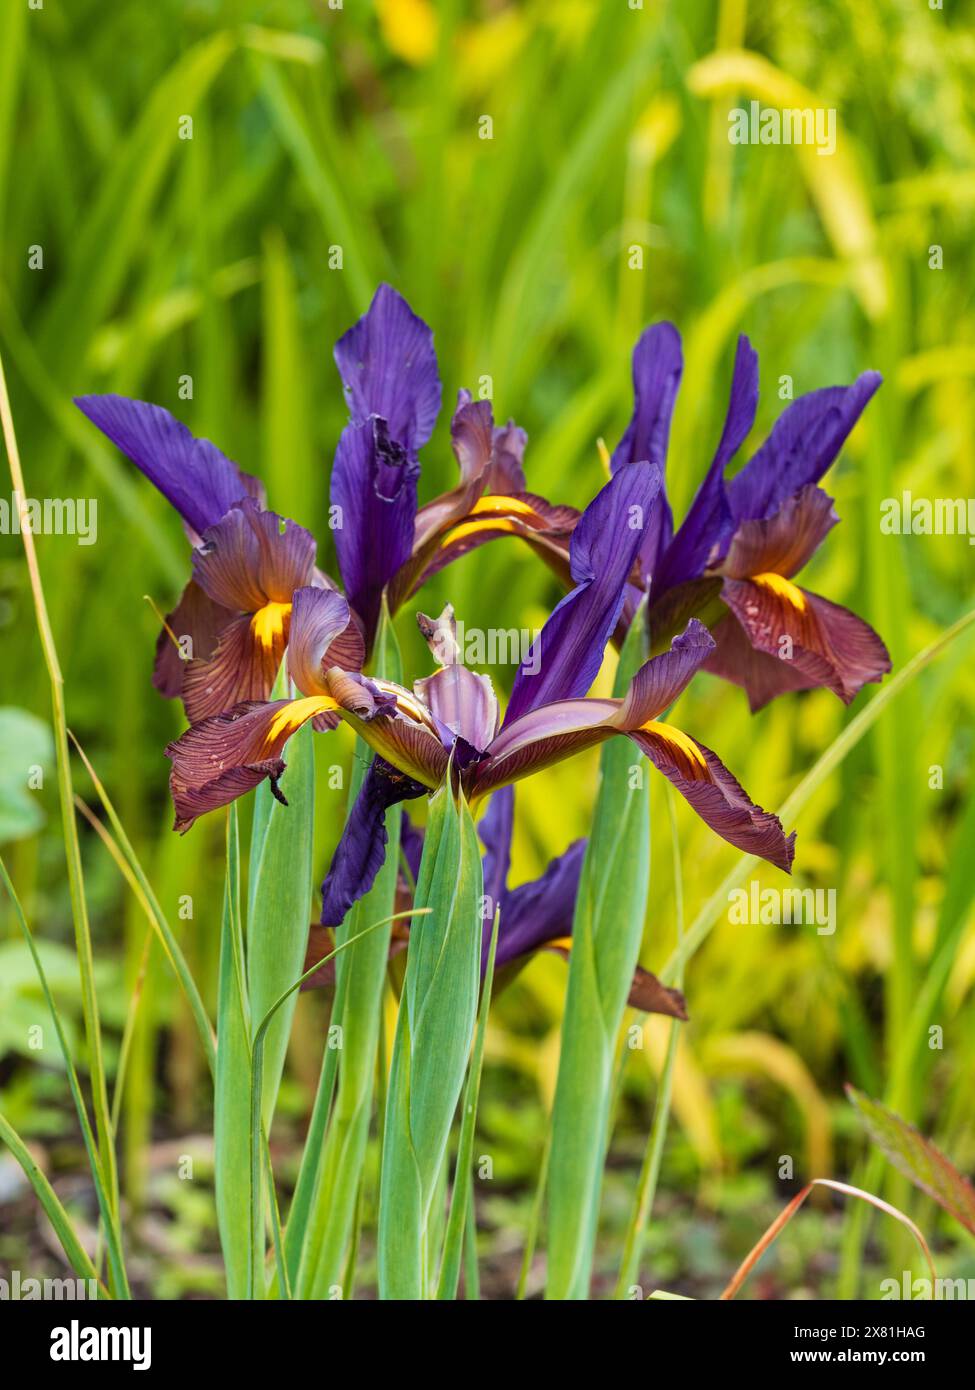 Bronze and purple blloms of the hardy, late spring to early summer flowering Dutch iris, Iris x hollandica 'Eye of the Tiger' Stock Photo